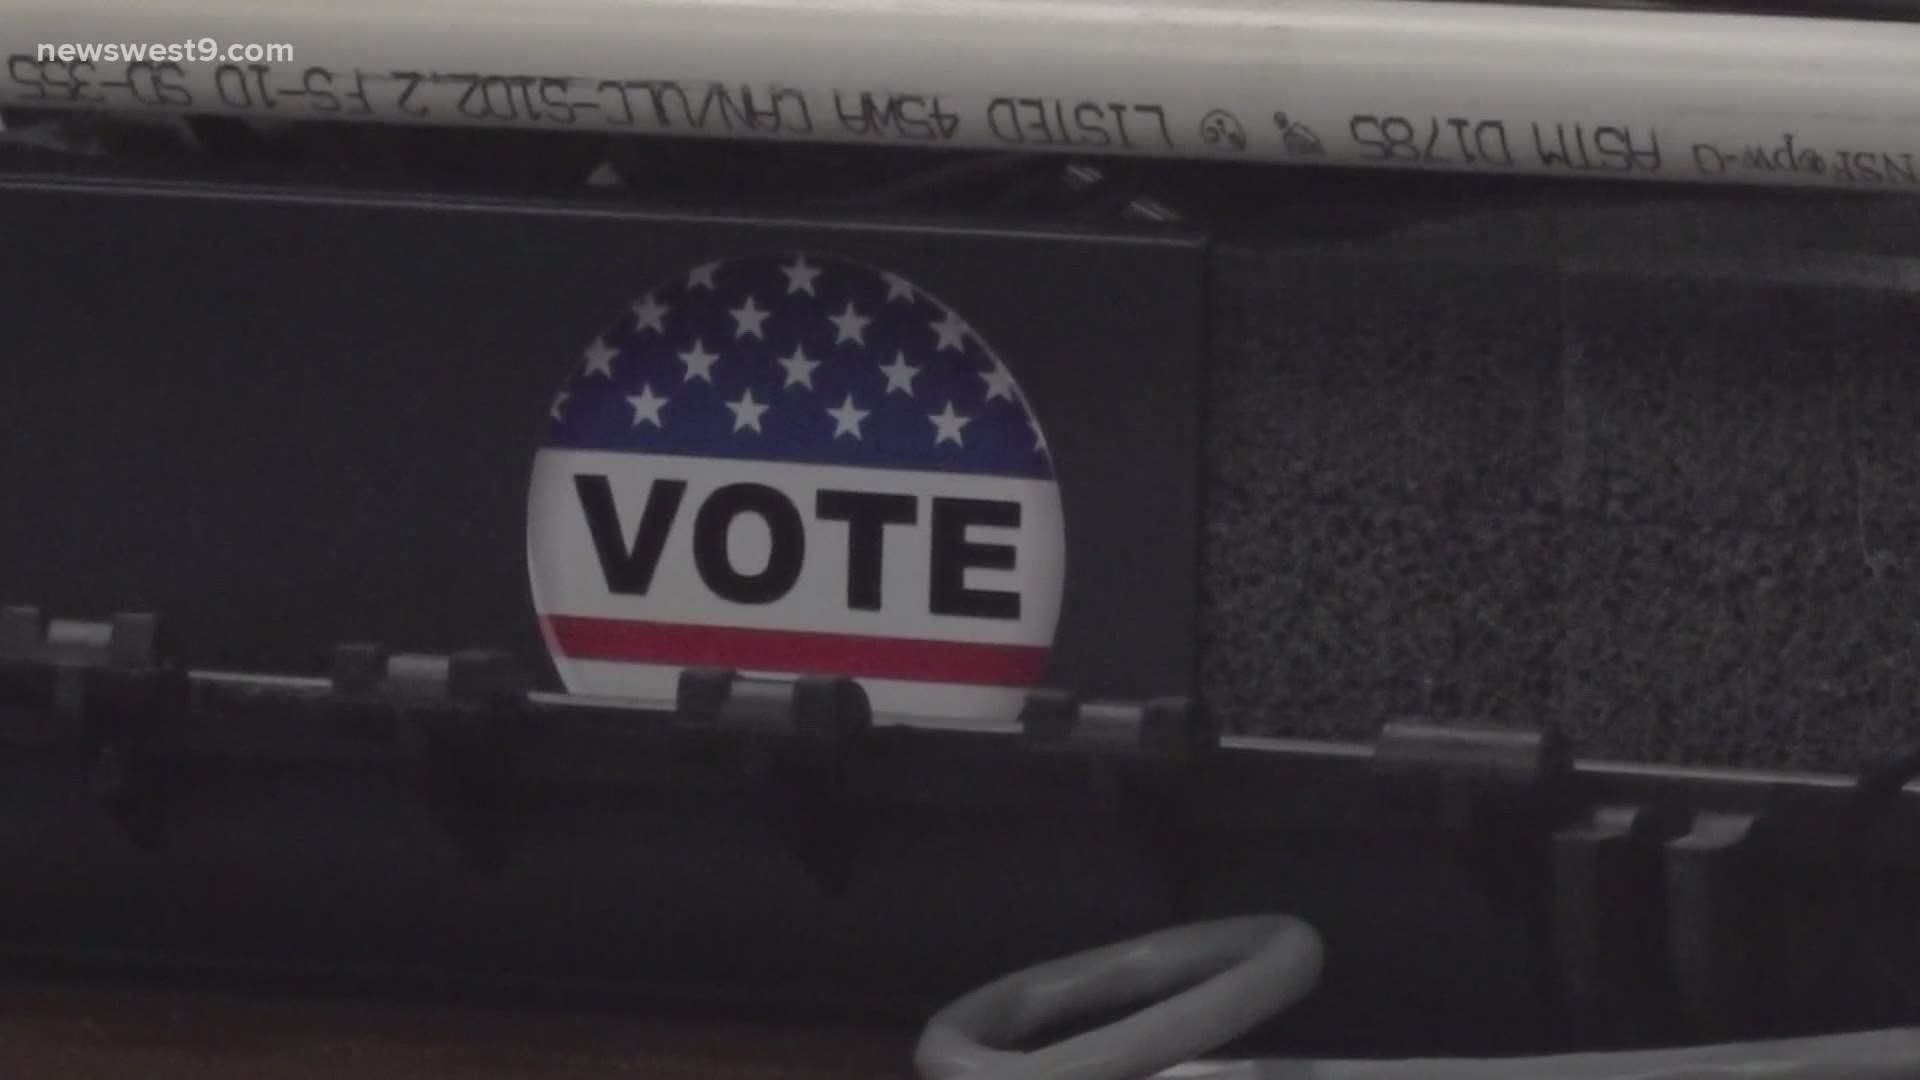 "The main thing that we wanted is a very safe, well-run, effective election for Midland," Carolyn Graves, Midland Co. elections administrator said.